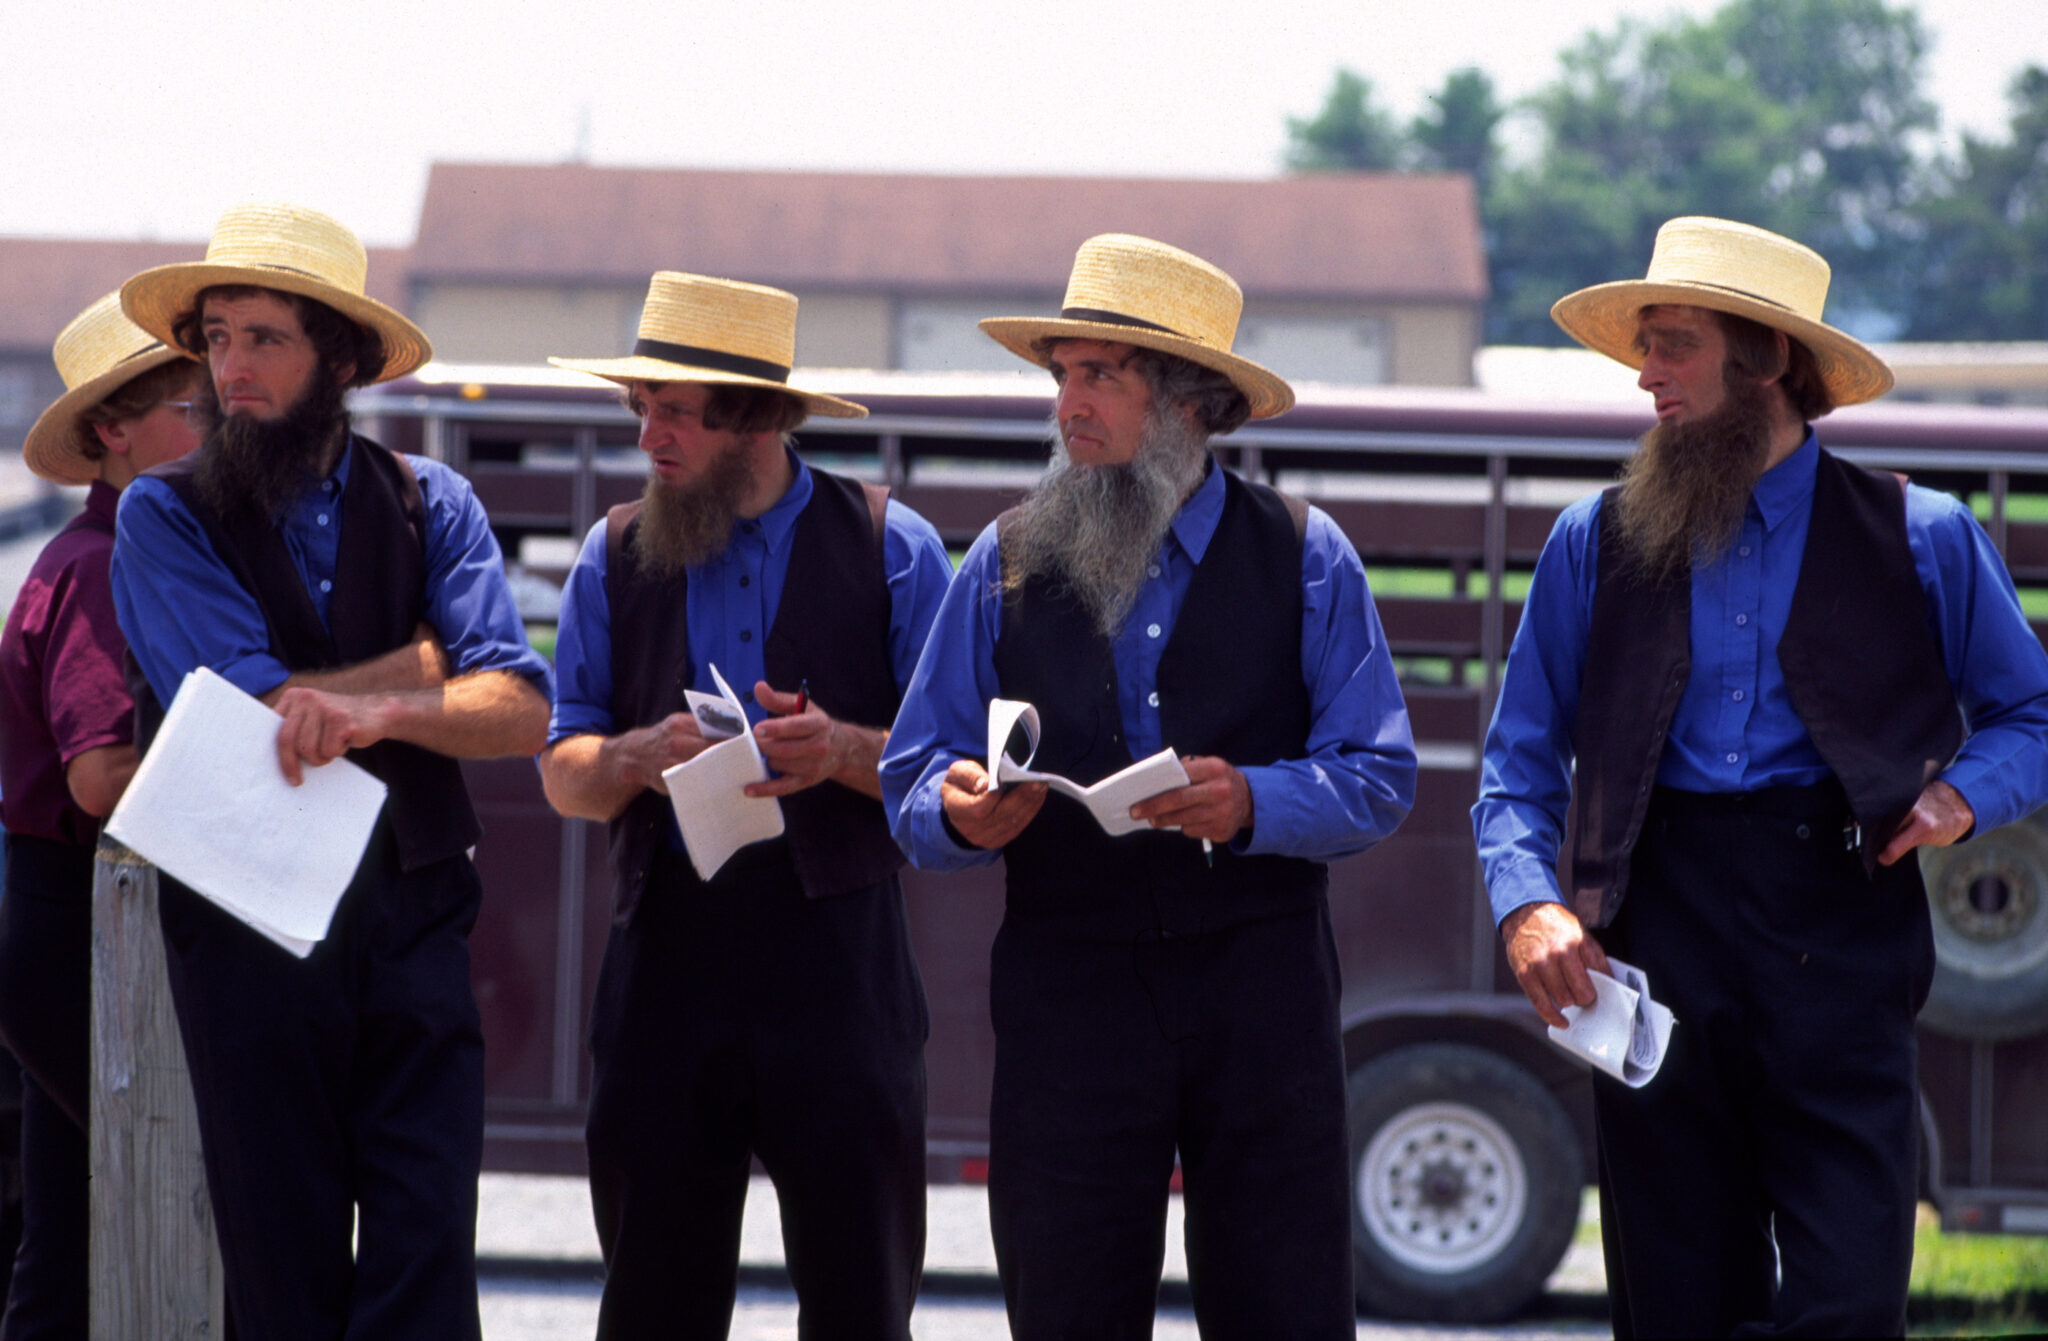 Amish vs. Mennonite: Understanding the Differences and Similarities